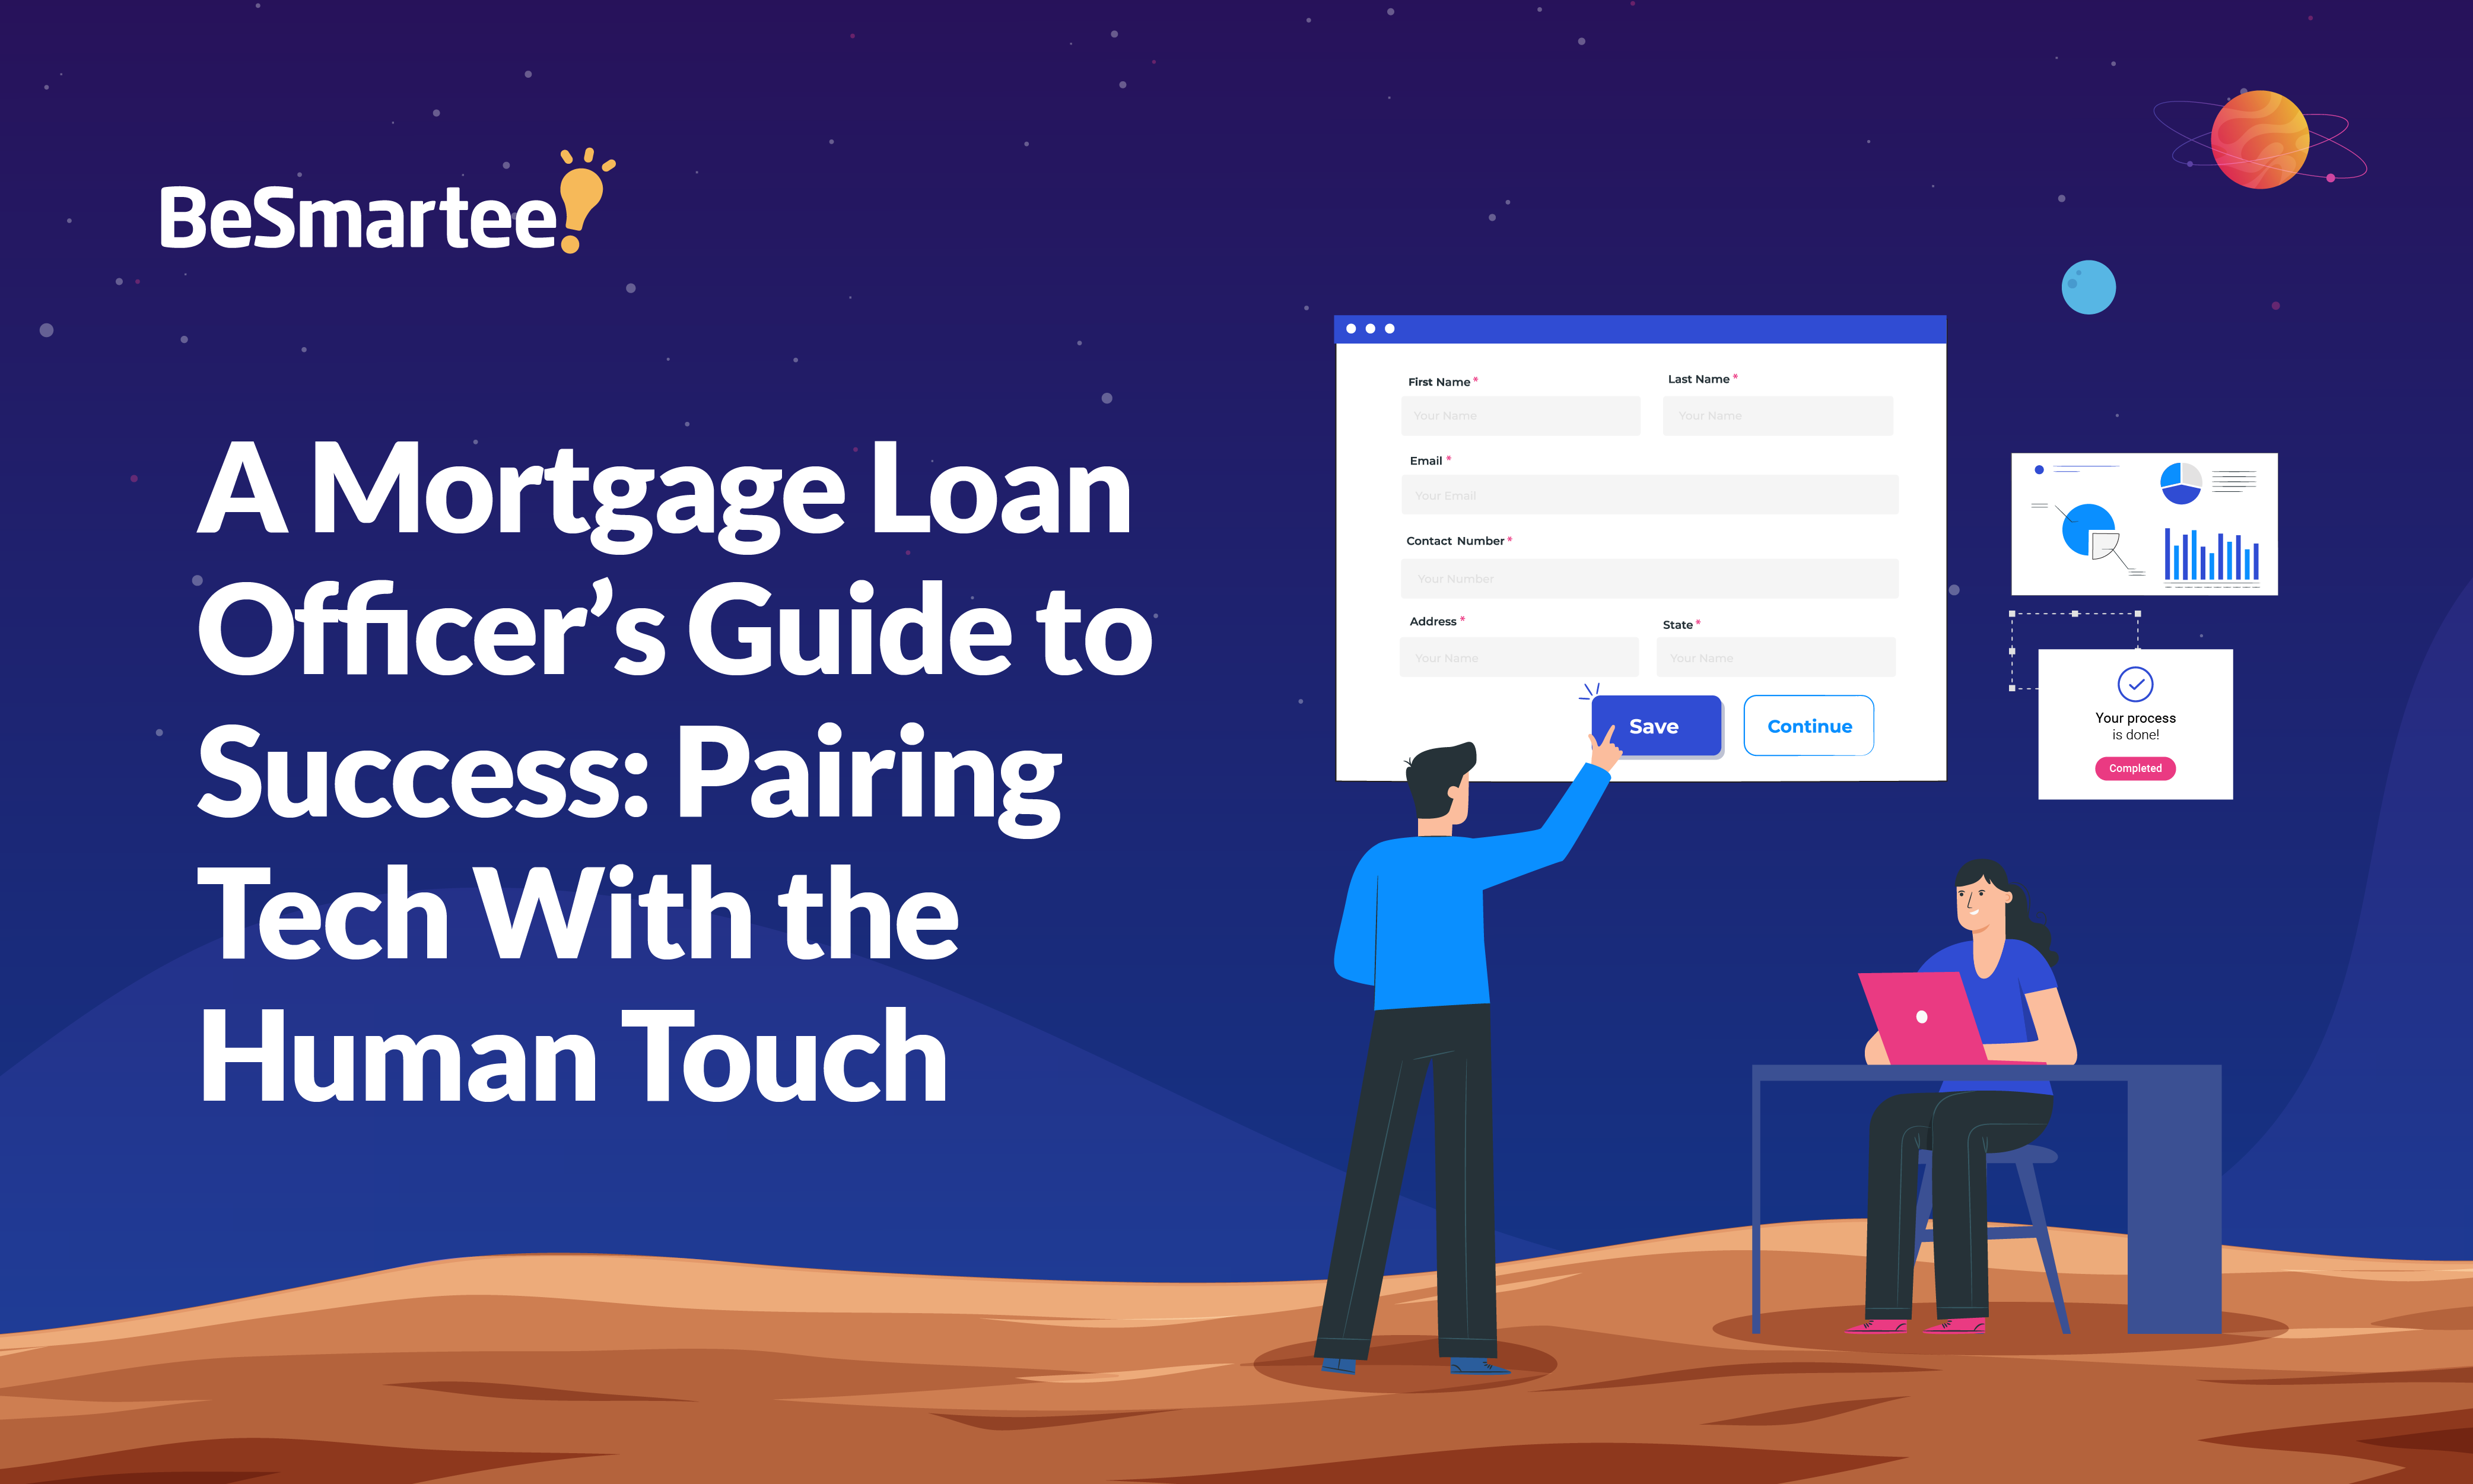 A Mortgage Loan Officer’s Guide to Success: Pairing Tech with Human Touch